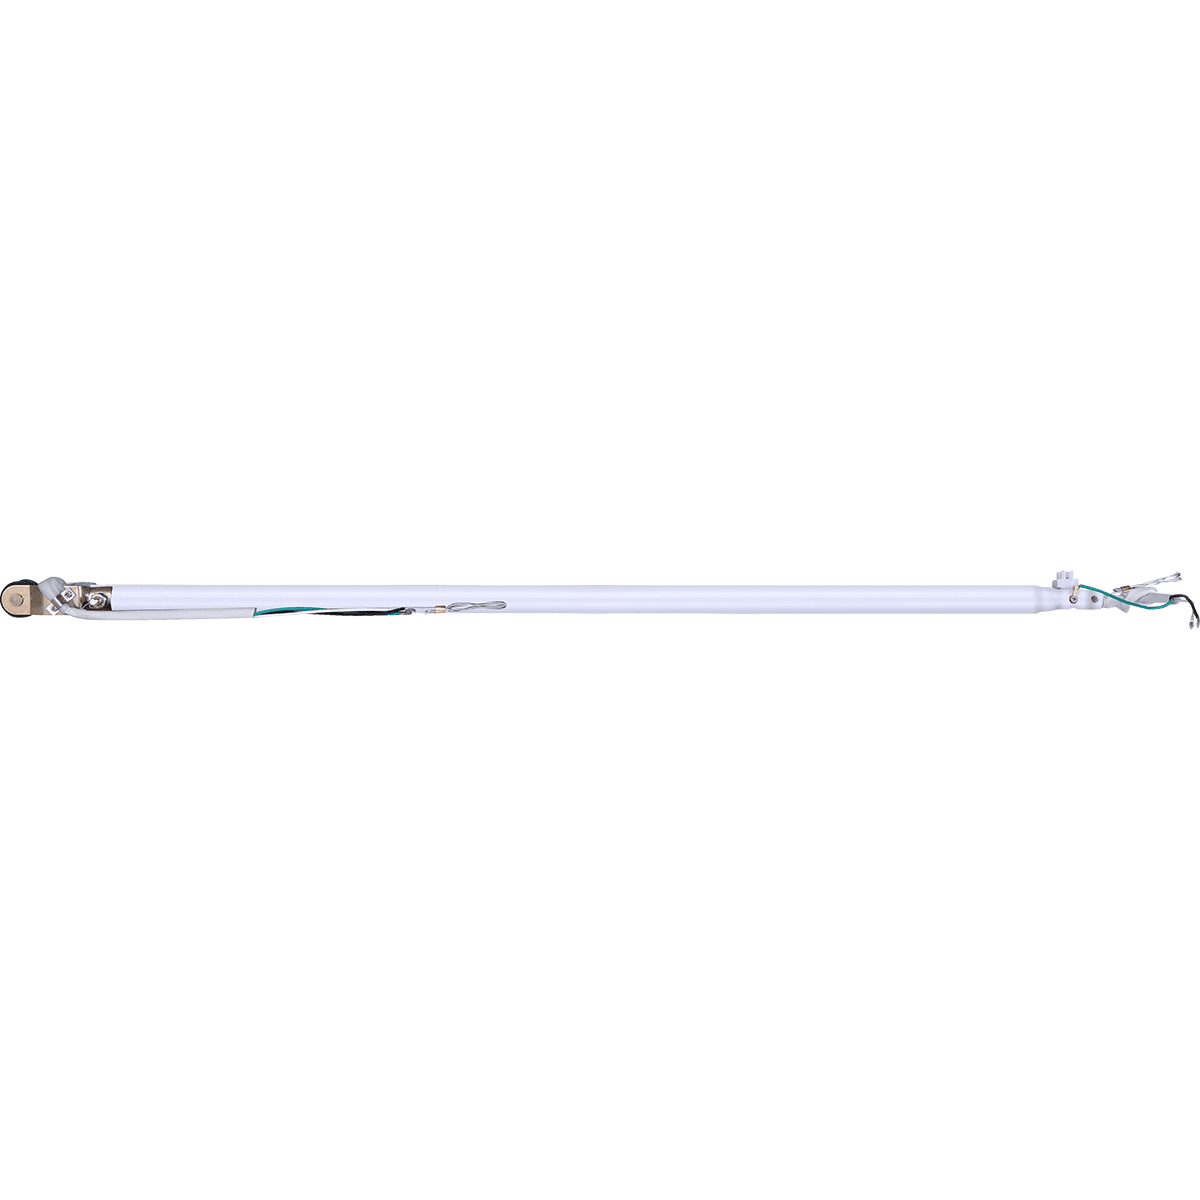 Canarm 36-in Water Resistant Downrod for CP48DW, CP56DW, CP60DW DC Industrial Fan - White